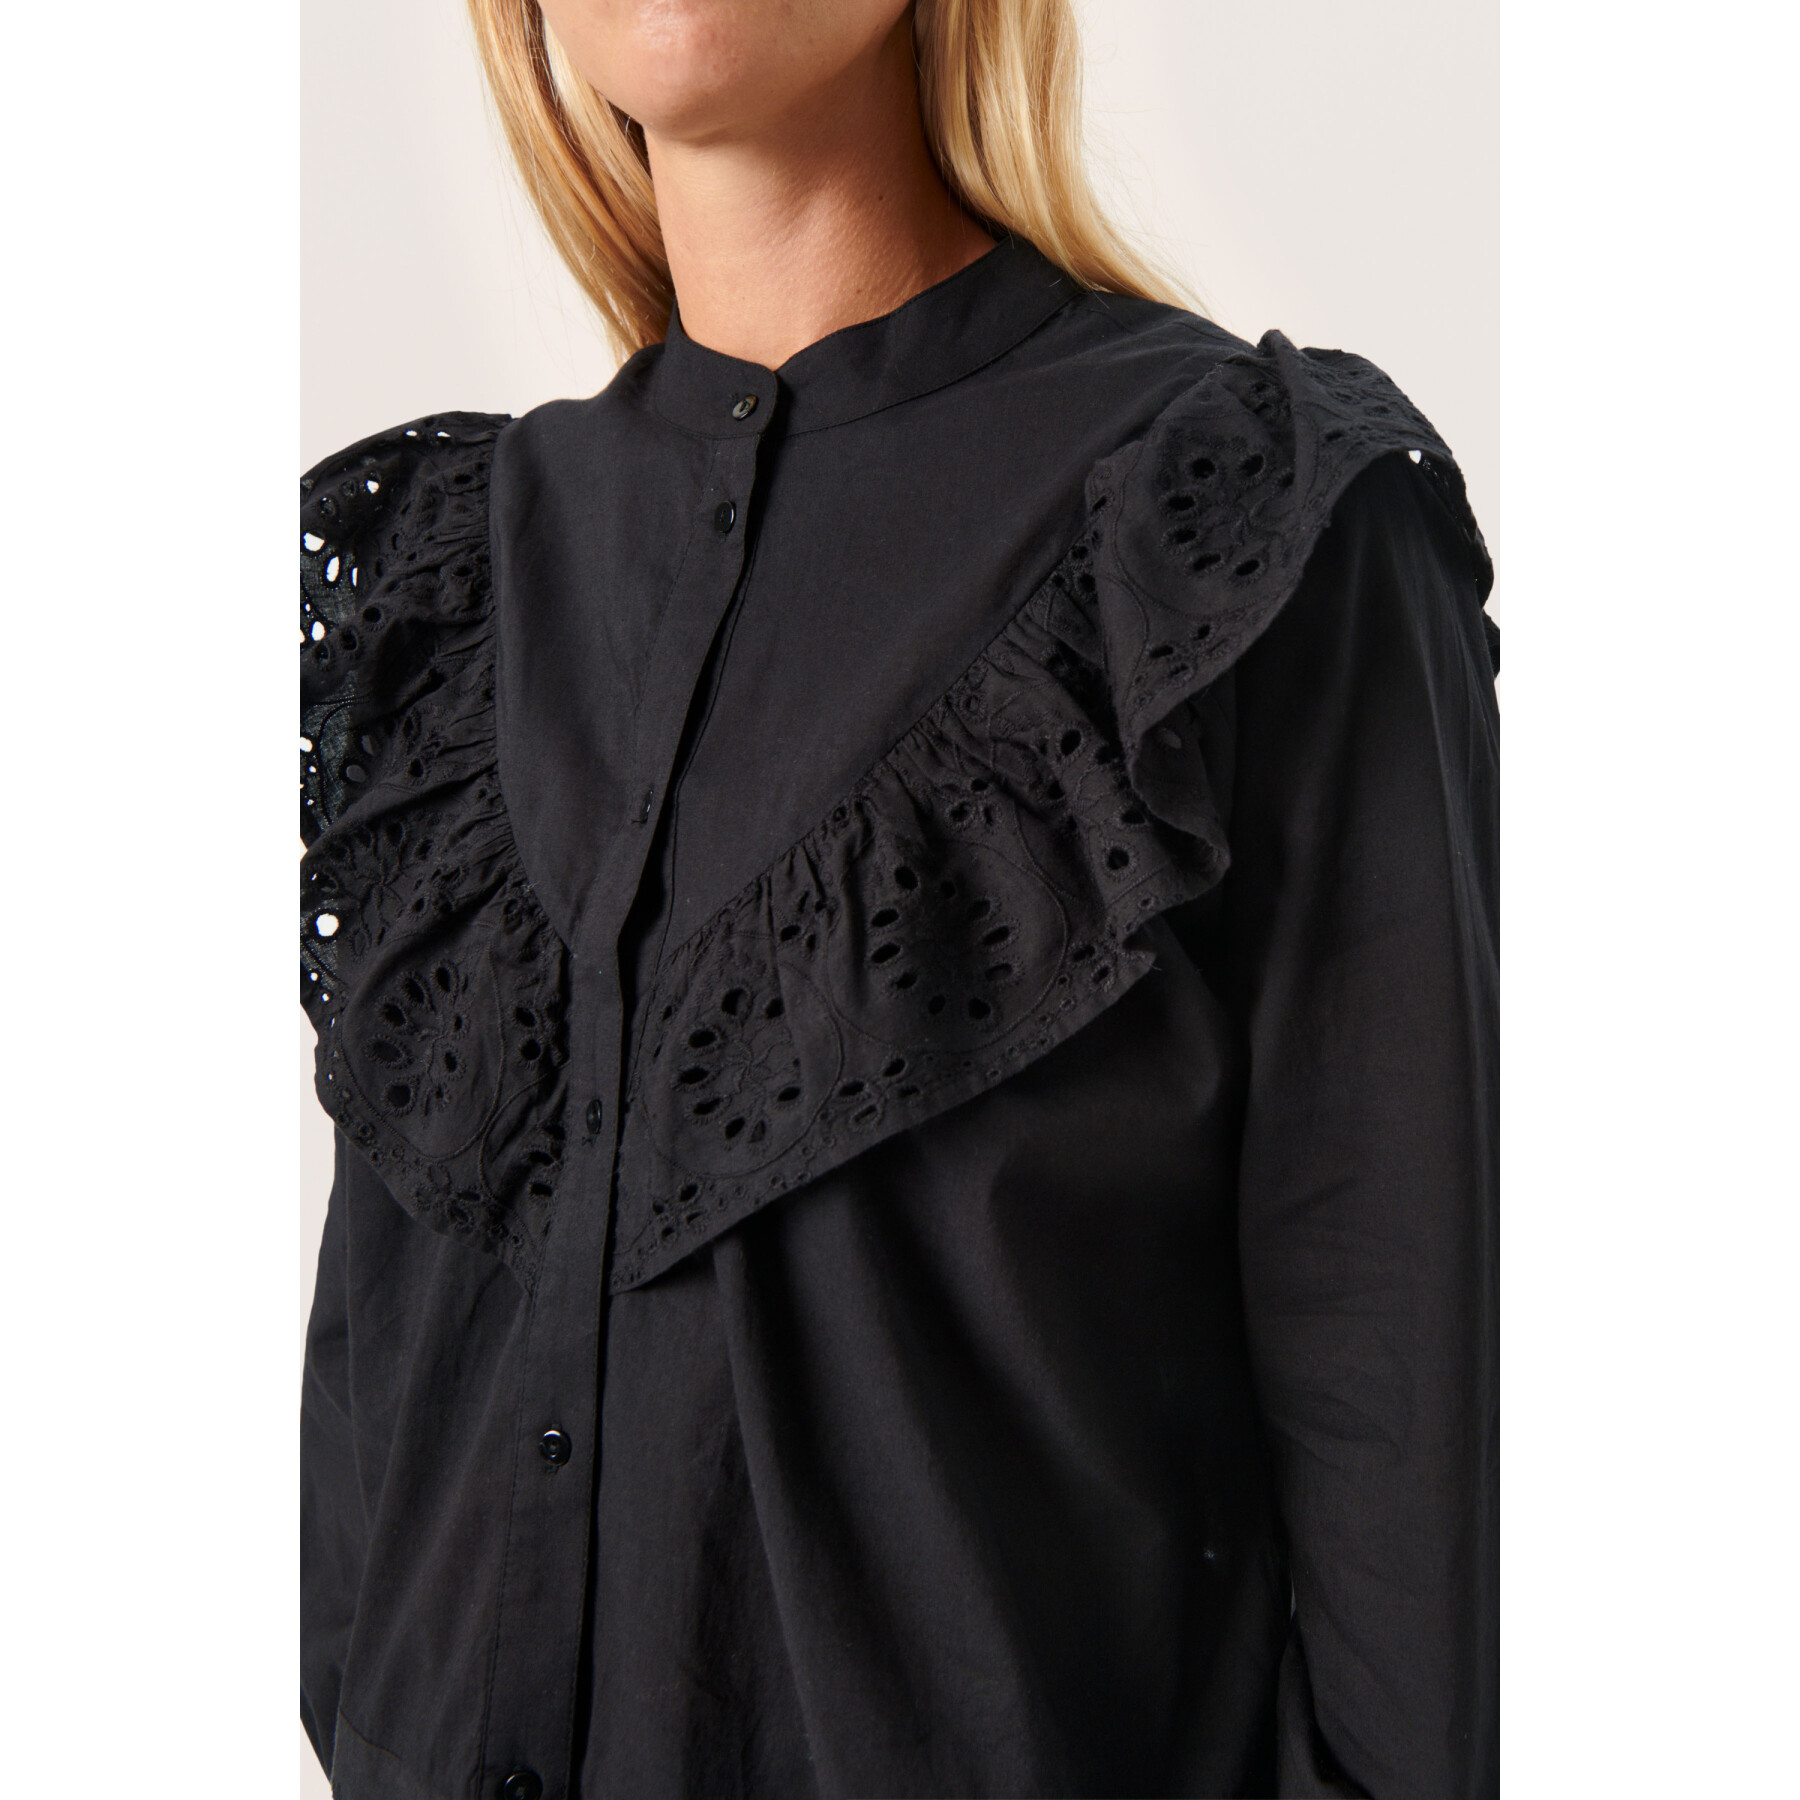 Blouse manches longues femme Soaked in Luxury Irim